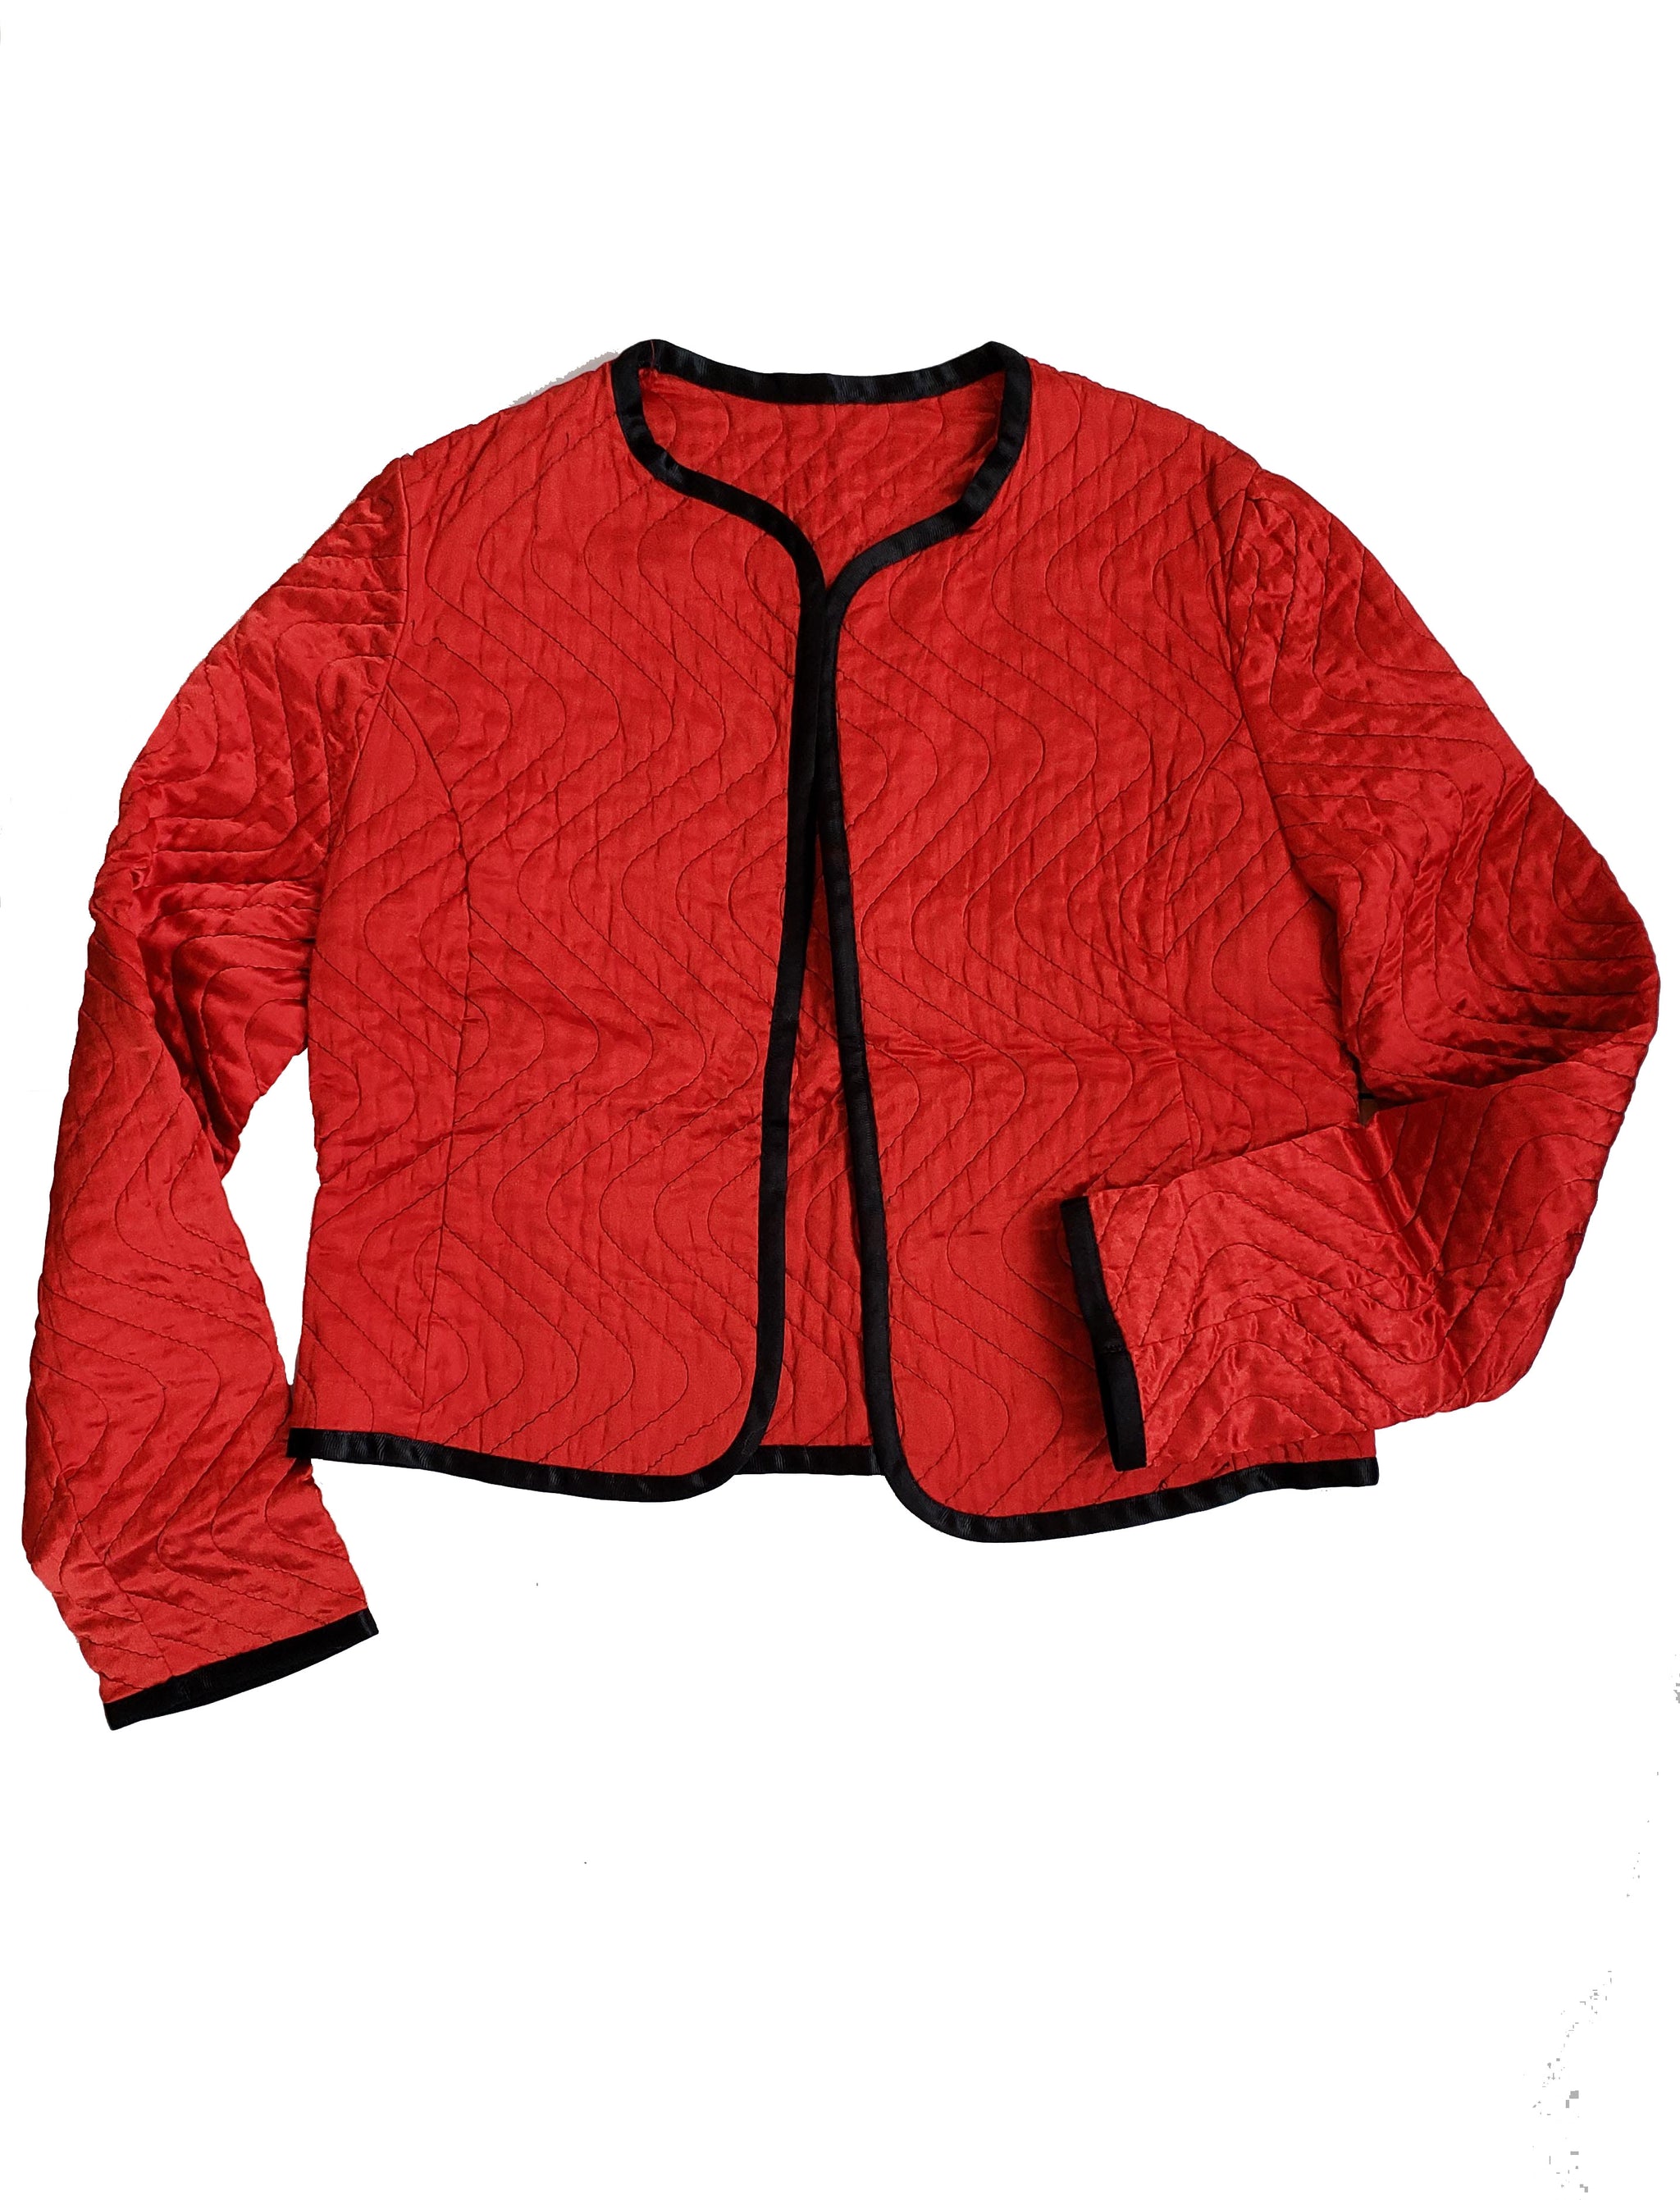 Vintage Women's Red Quilted Jacket